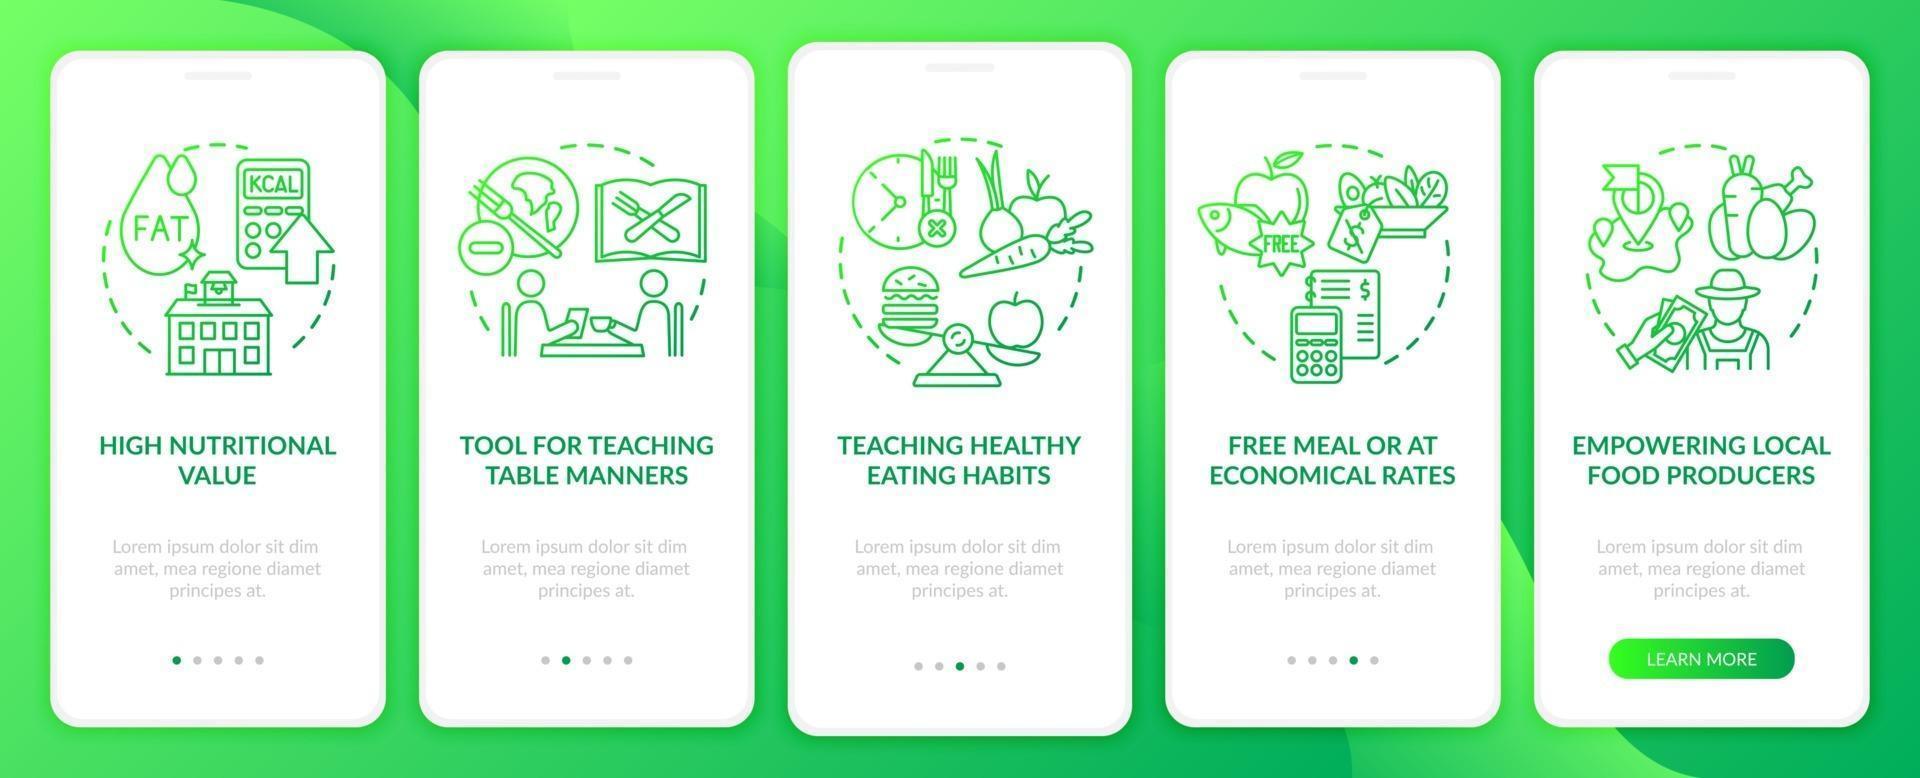 School eating rules onboarding mobile app page screen with concepts. Teaching table manners walkthrough 5 steps graphic instructions. UI, UX, GUI vector template with linear color illustrations